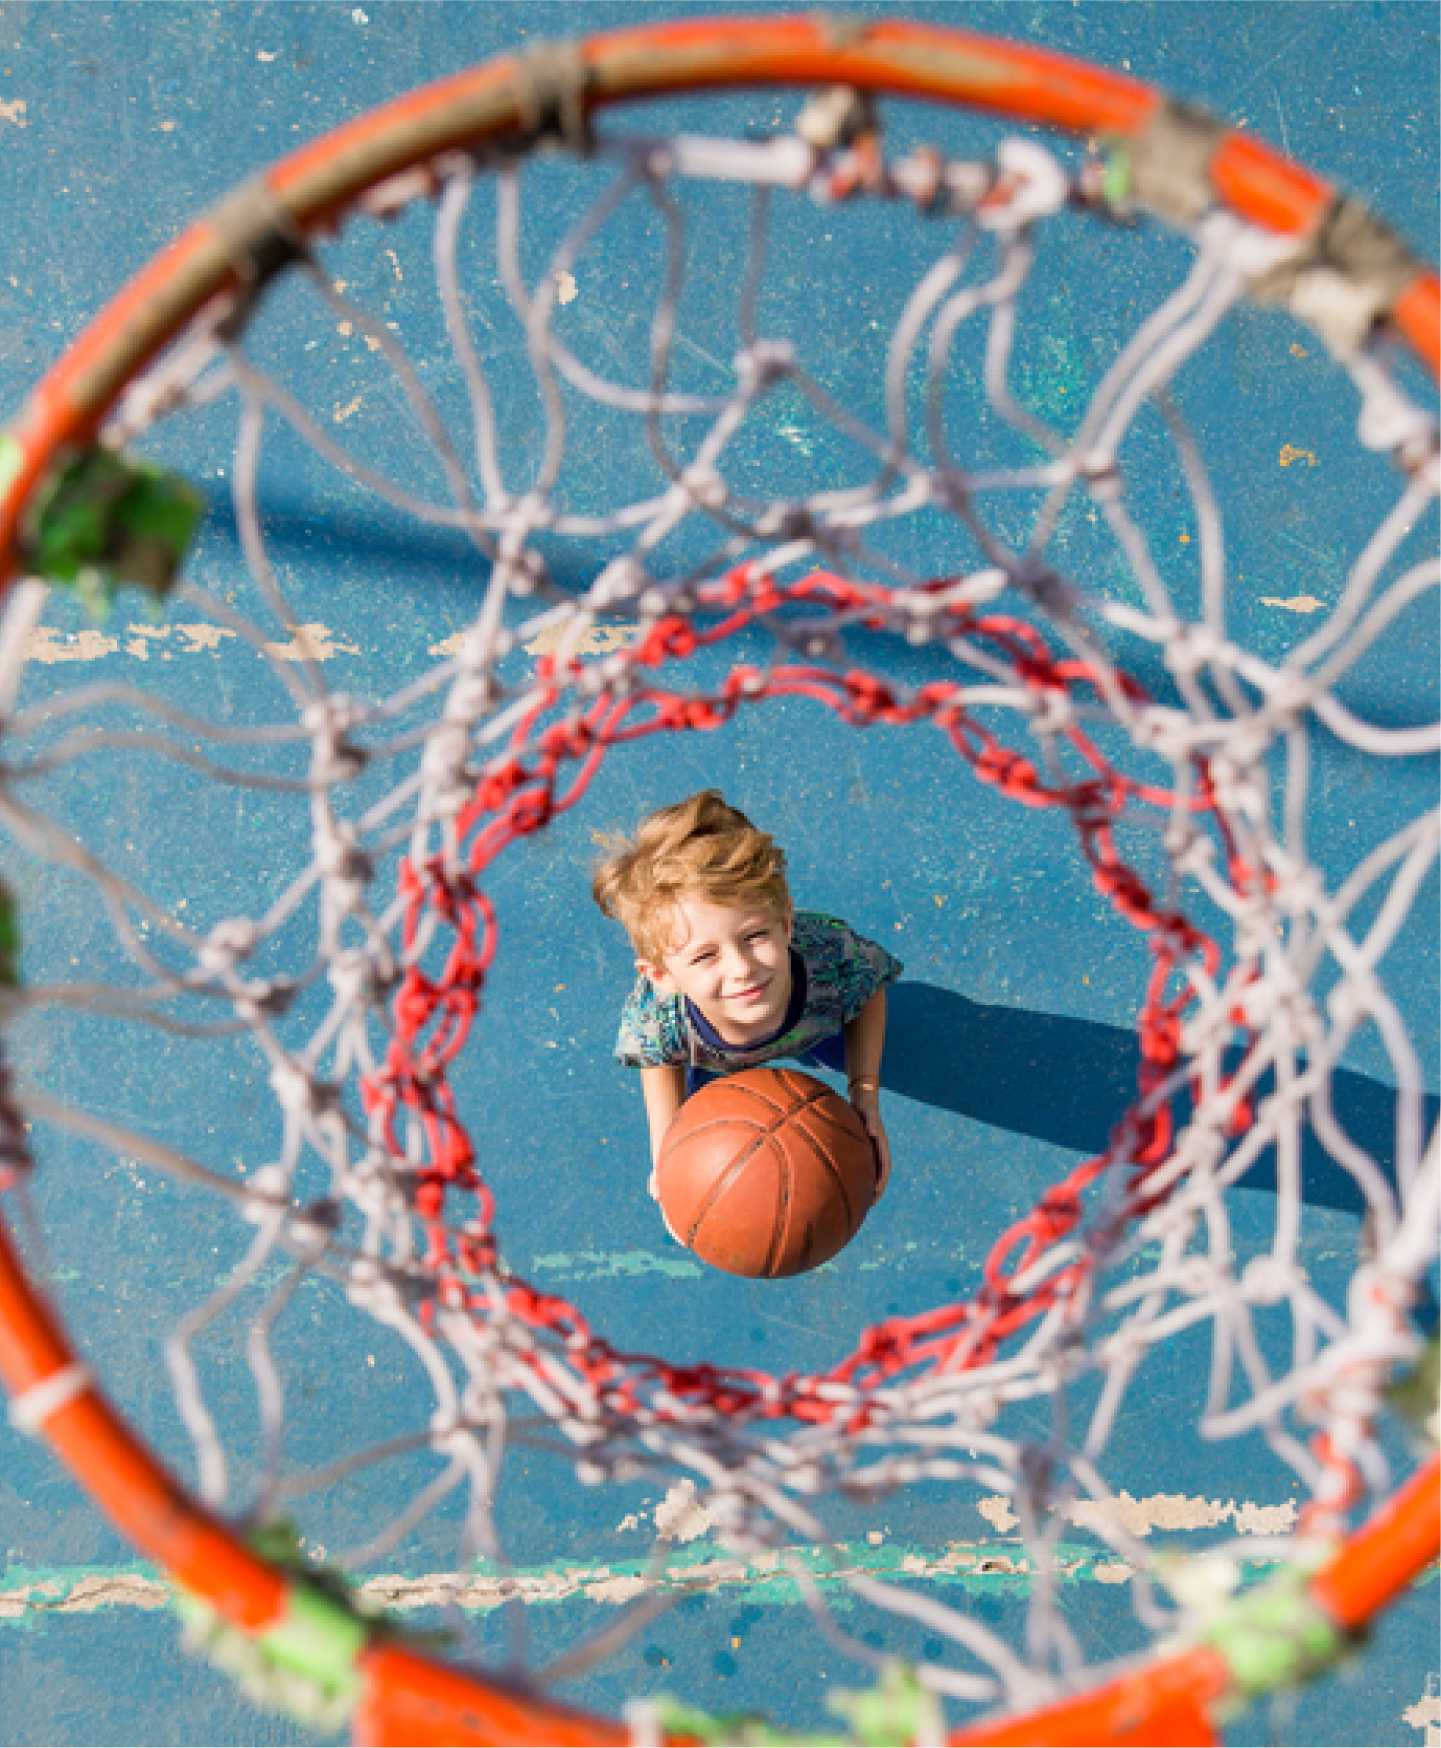 A child looks up through the hoop of a basketball net